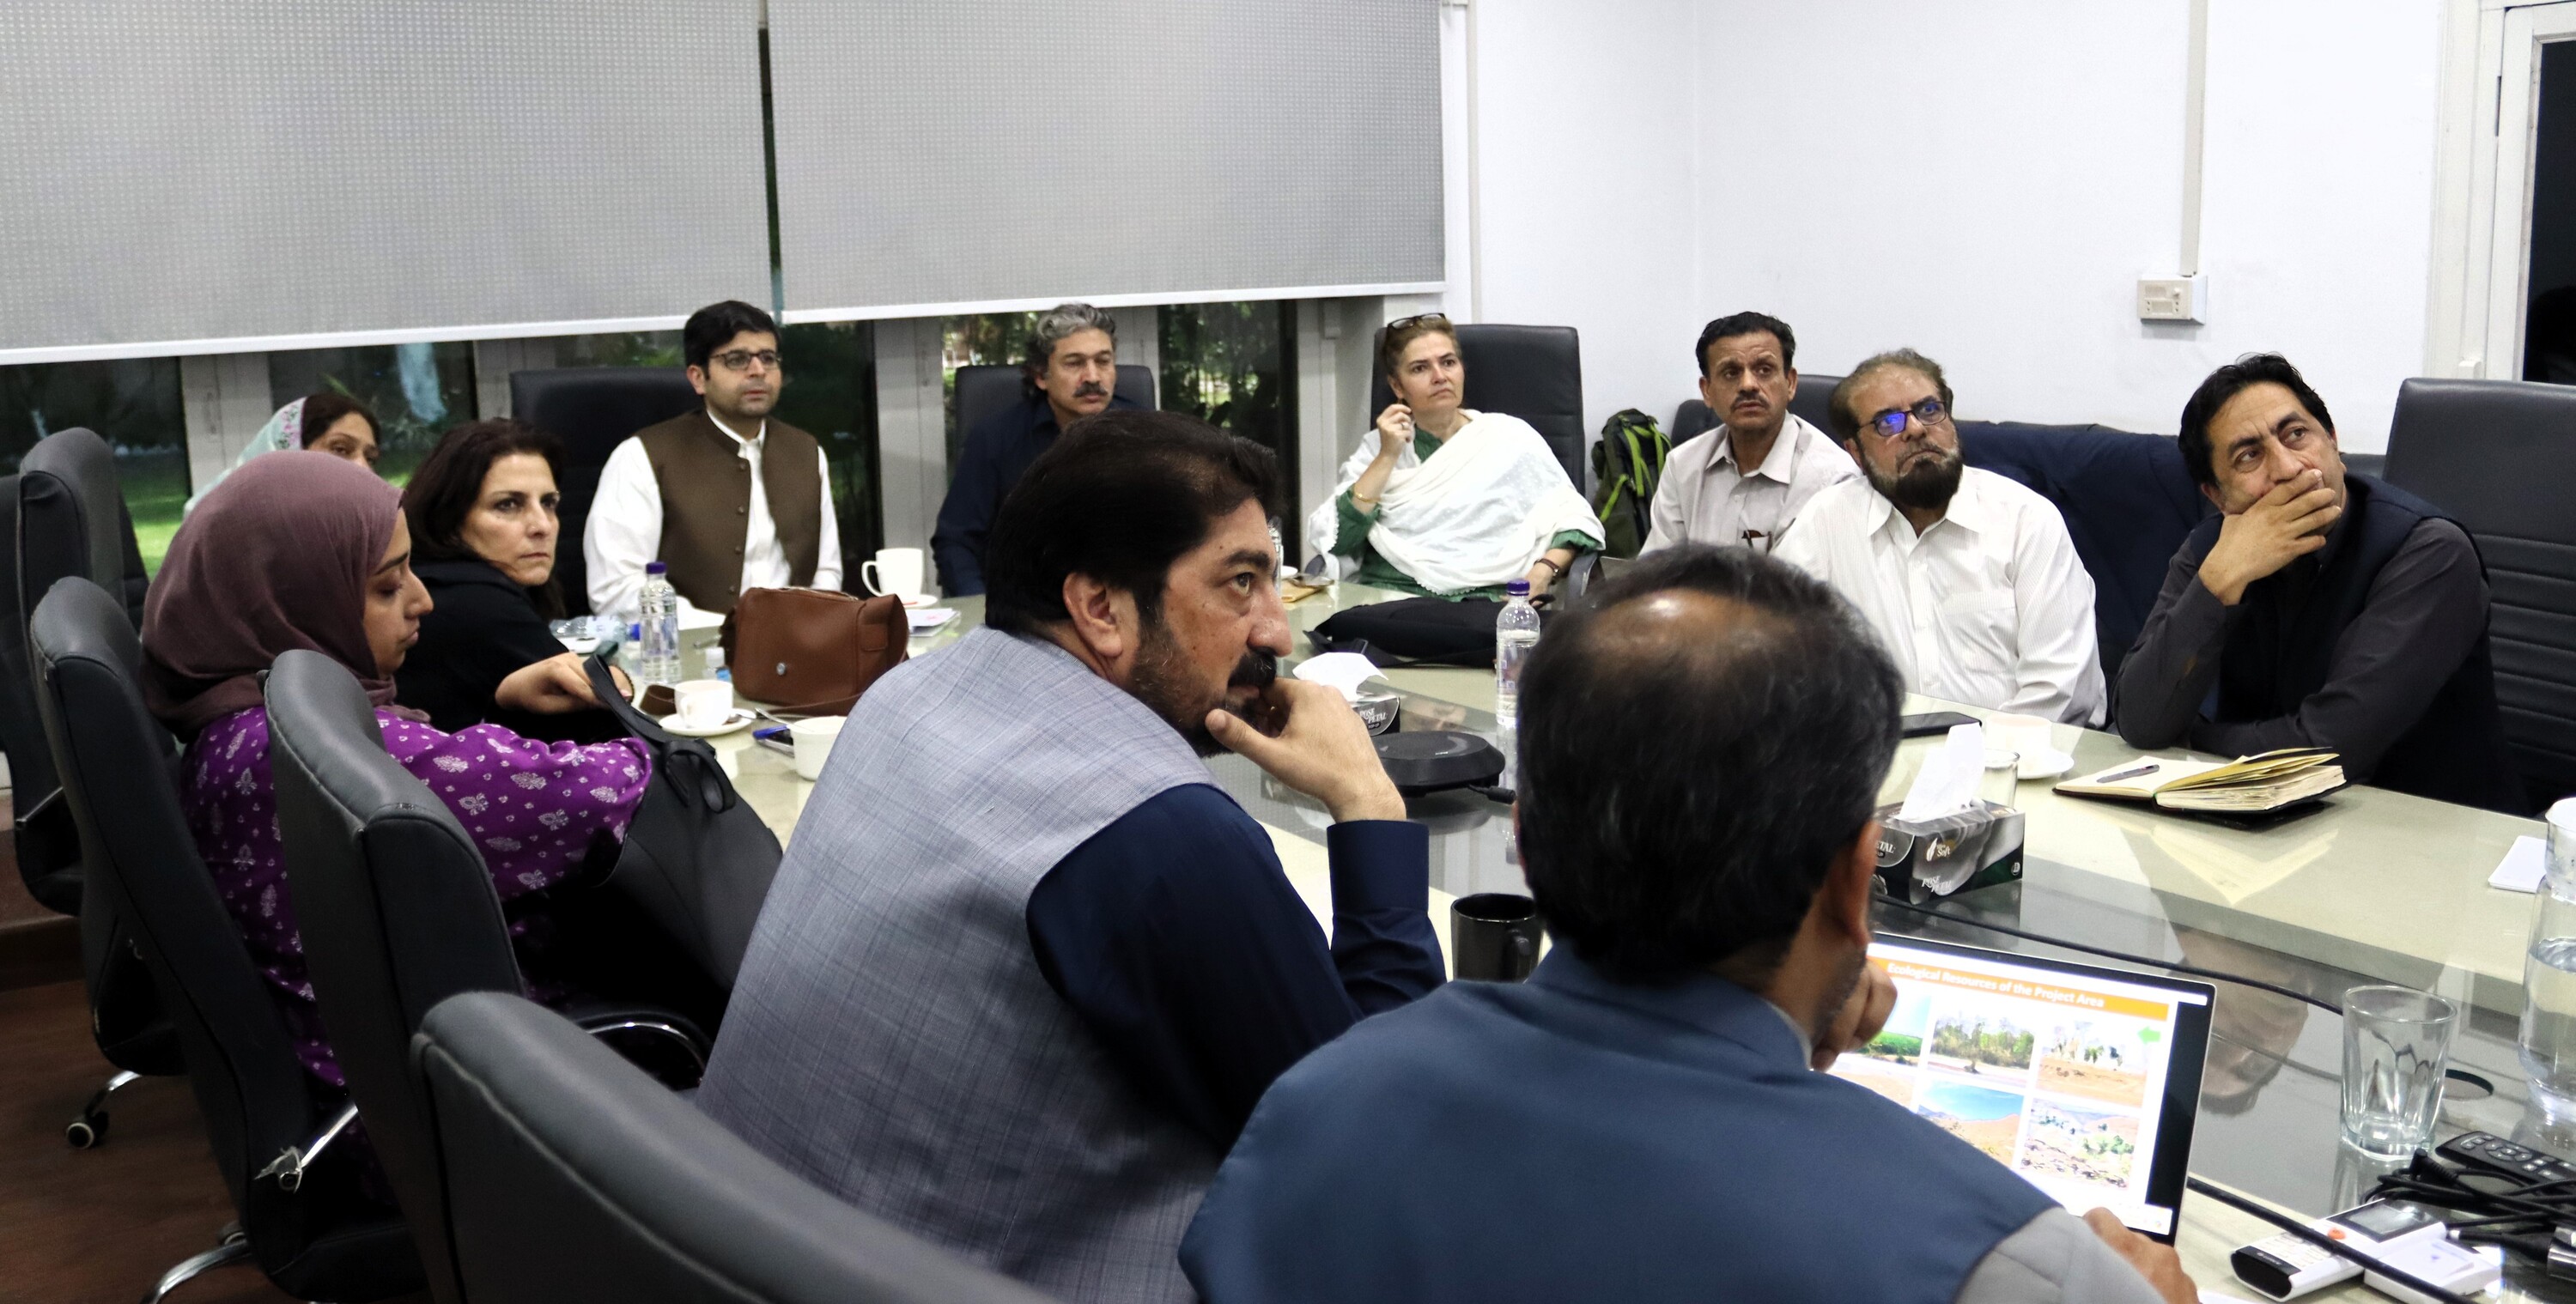 World Bank Social Safeguards Team Conducts Mission to Review Progress of Khyber Pass Economic Corridor Project